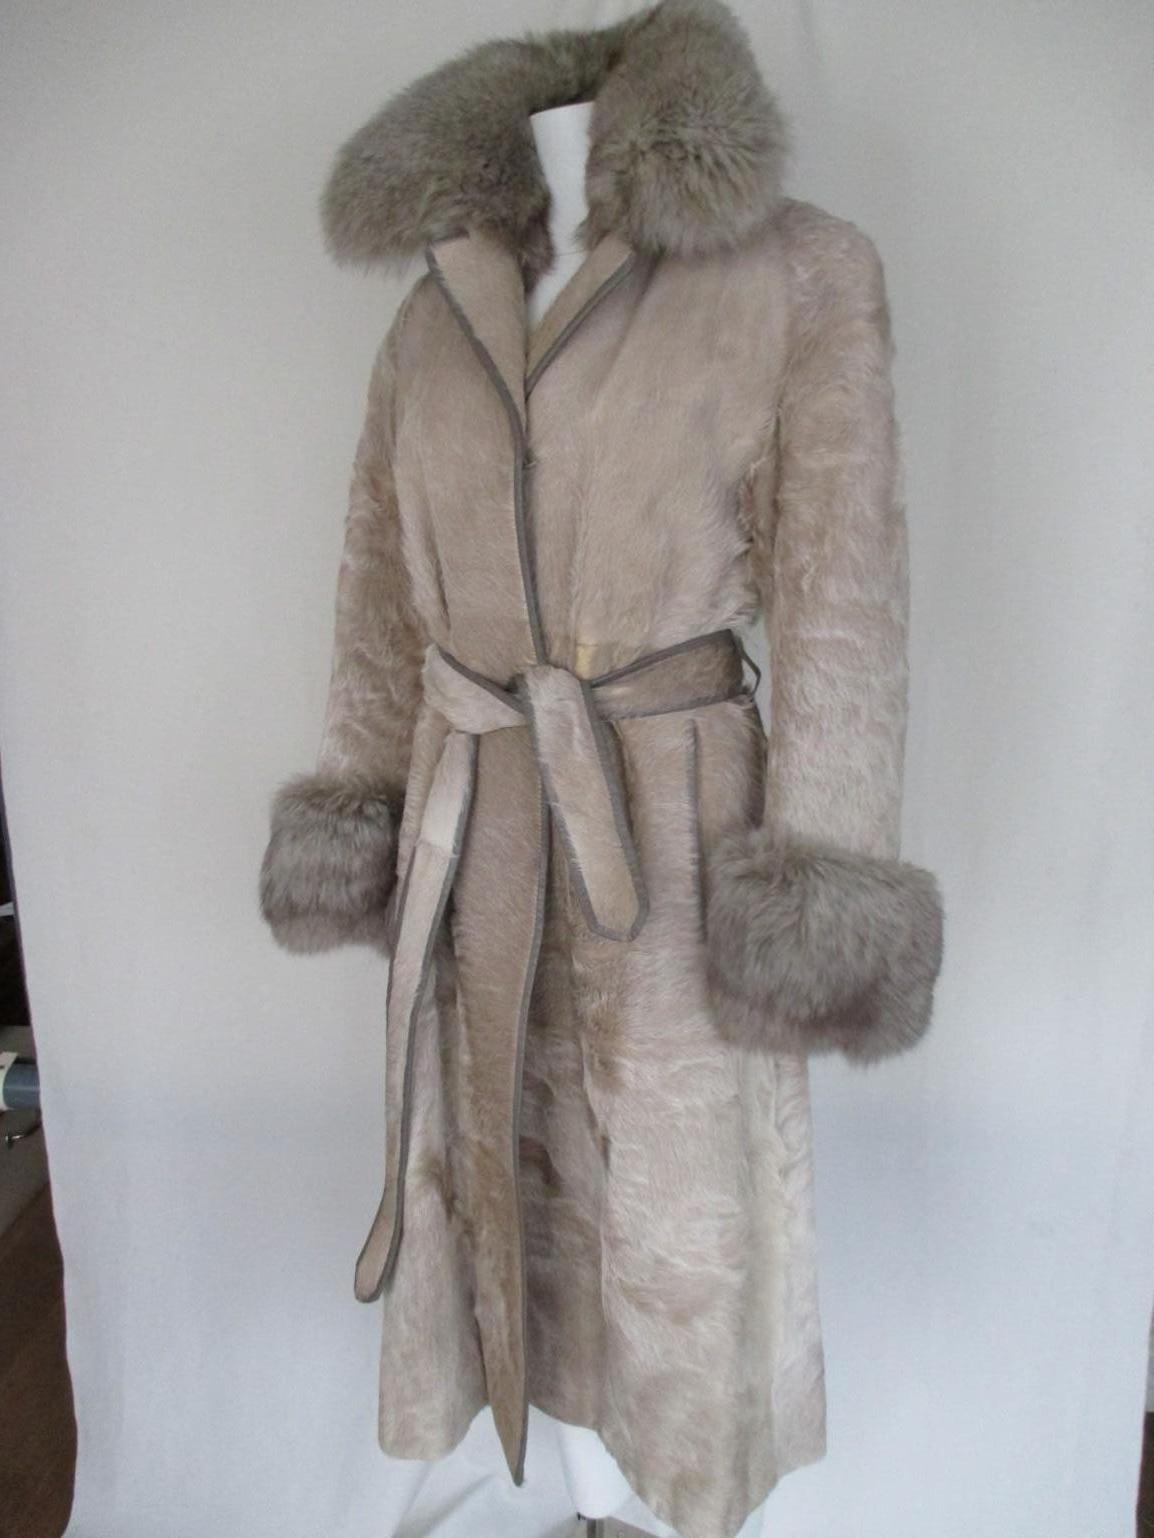 Amazing vintage coat from pony skin with fox fur collar and cuffs. 
With 2 pockets, 3 closing hooks, fully lined, leather trimmed and a matching belt.
Good preloved condition, with some signs of use.
Rare to find.
Size is about small, see section